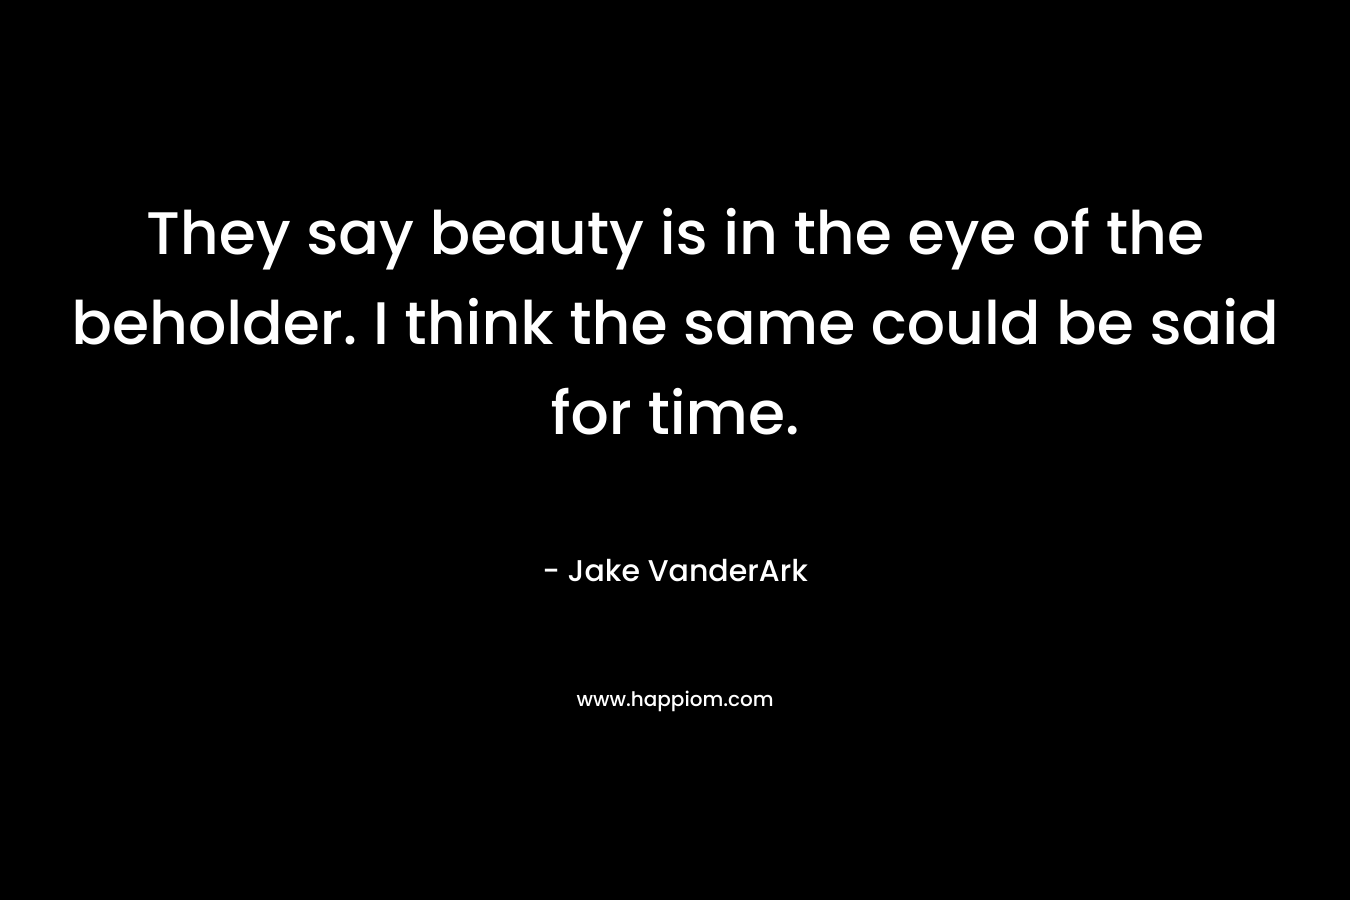 They say beauty is in the eye of the beholder. I think the same could be said for time. – Jake VanderArk